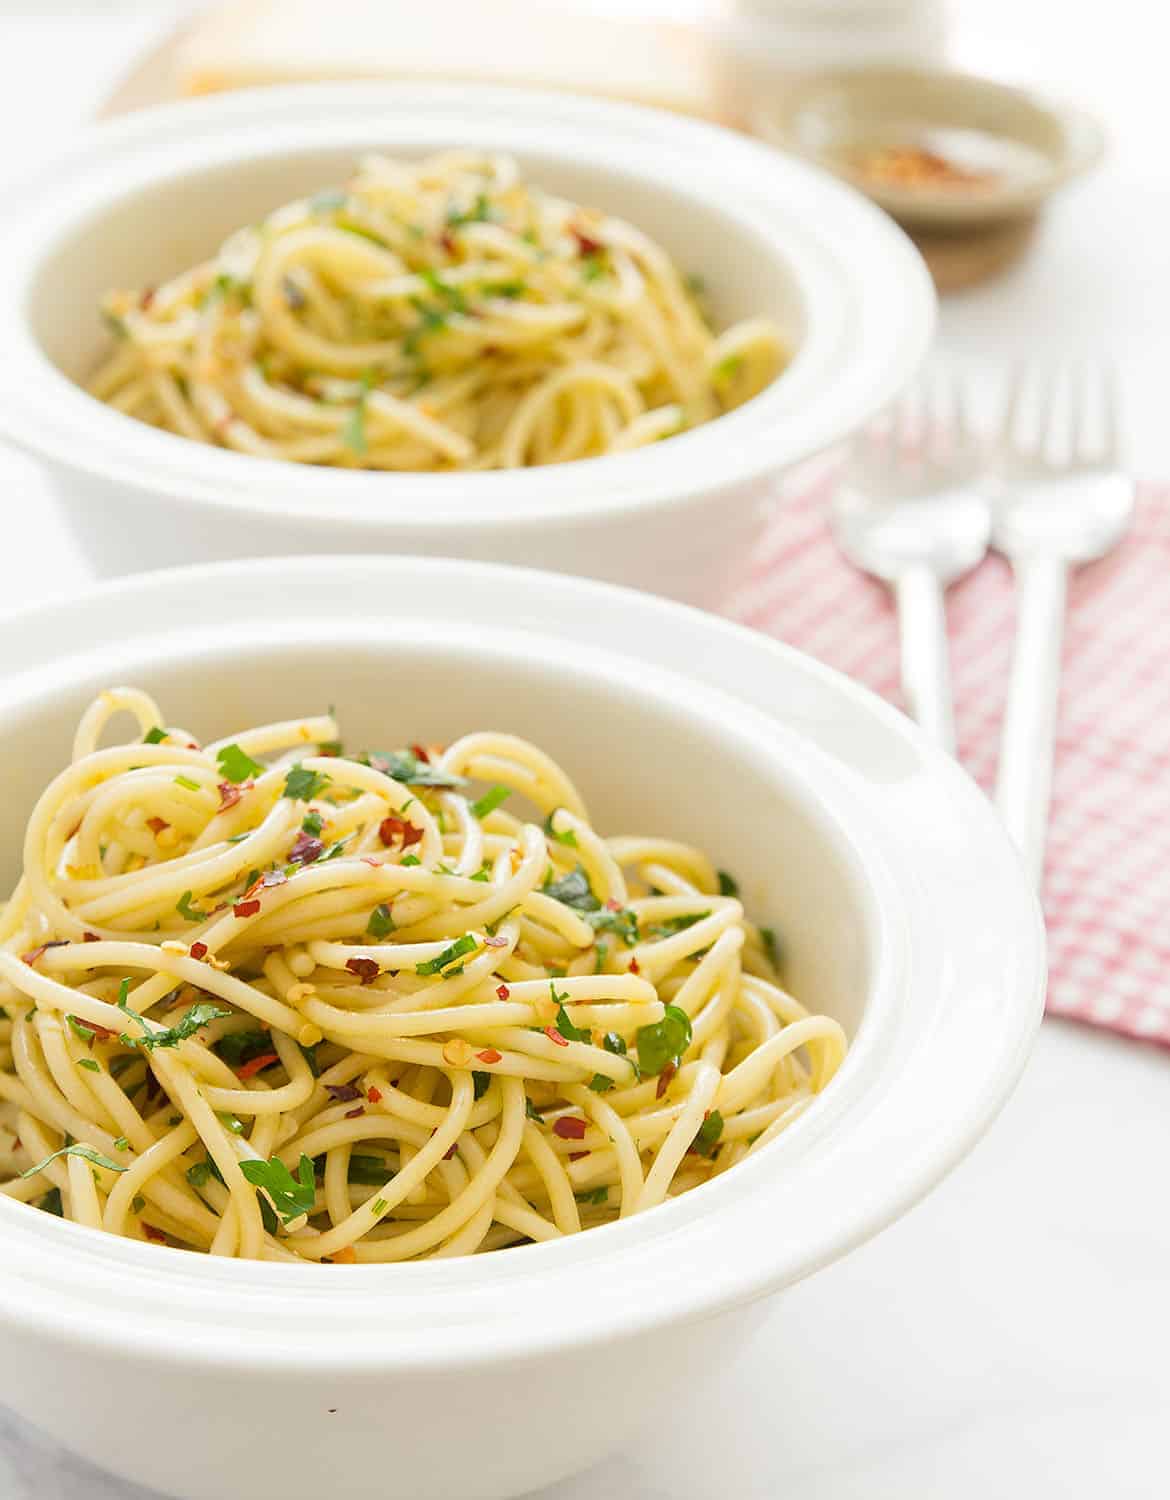 Spaghetti with garlic and olive oil served in two white bowls.